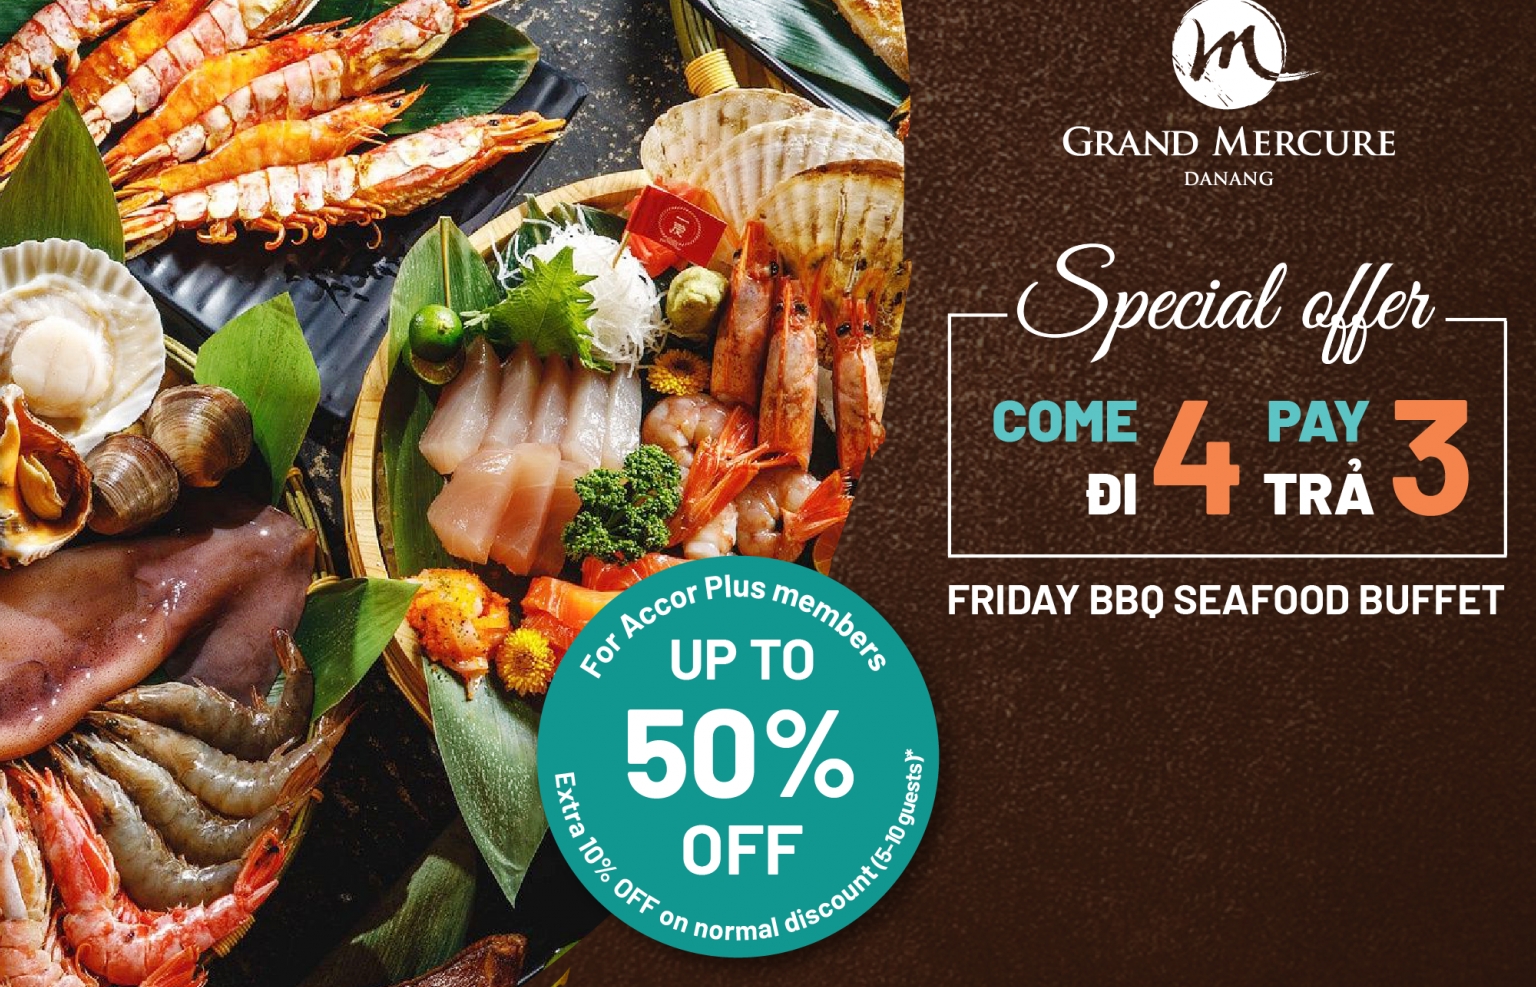 "Dine 4 Pay 3" Friday BBQ seafood buffet at Grand Mercure Danang